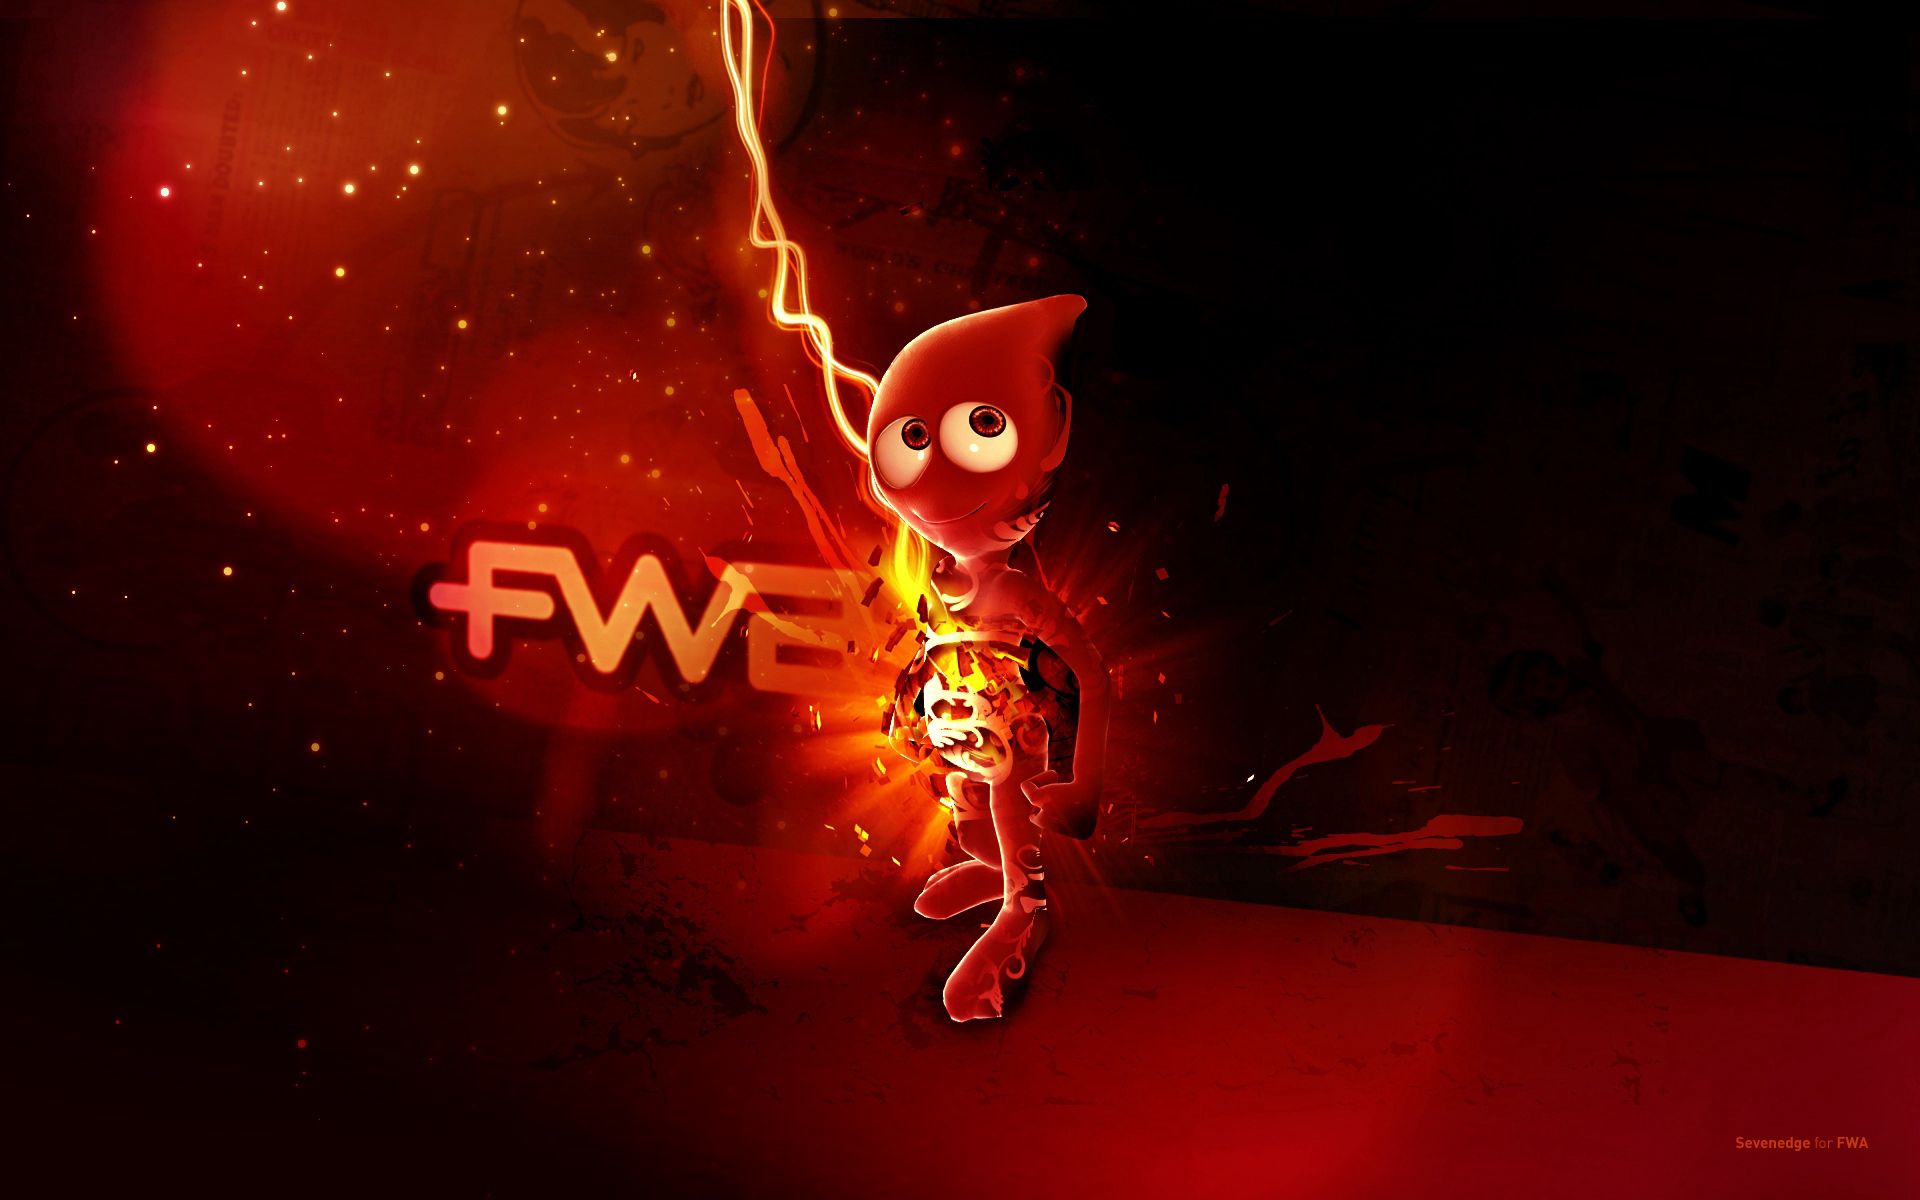 Best Fwa wallpapers for phone screen